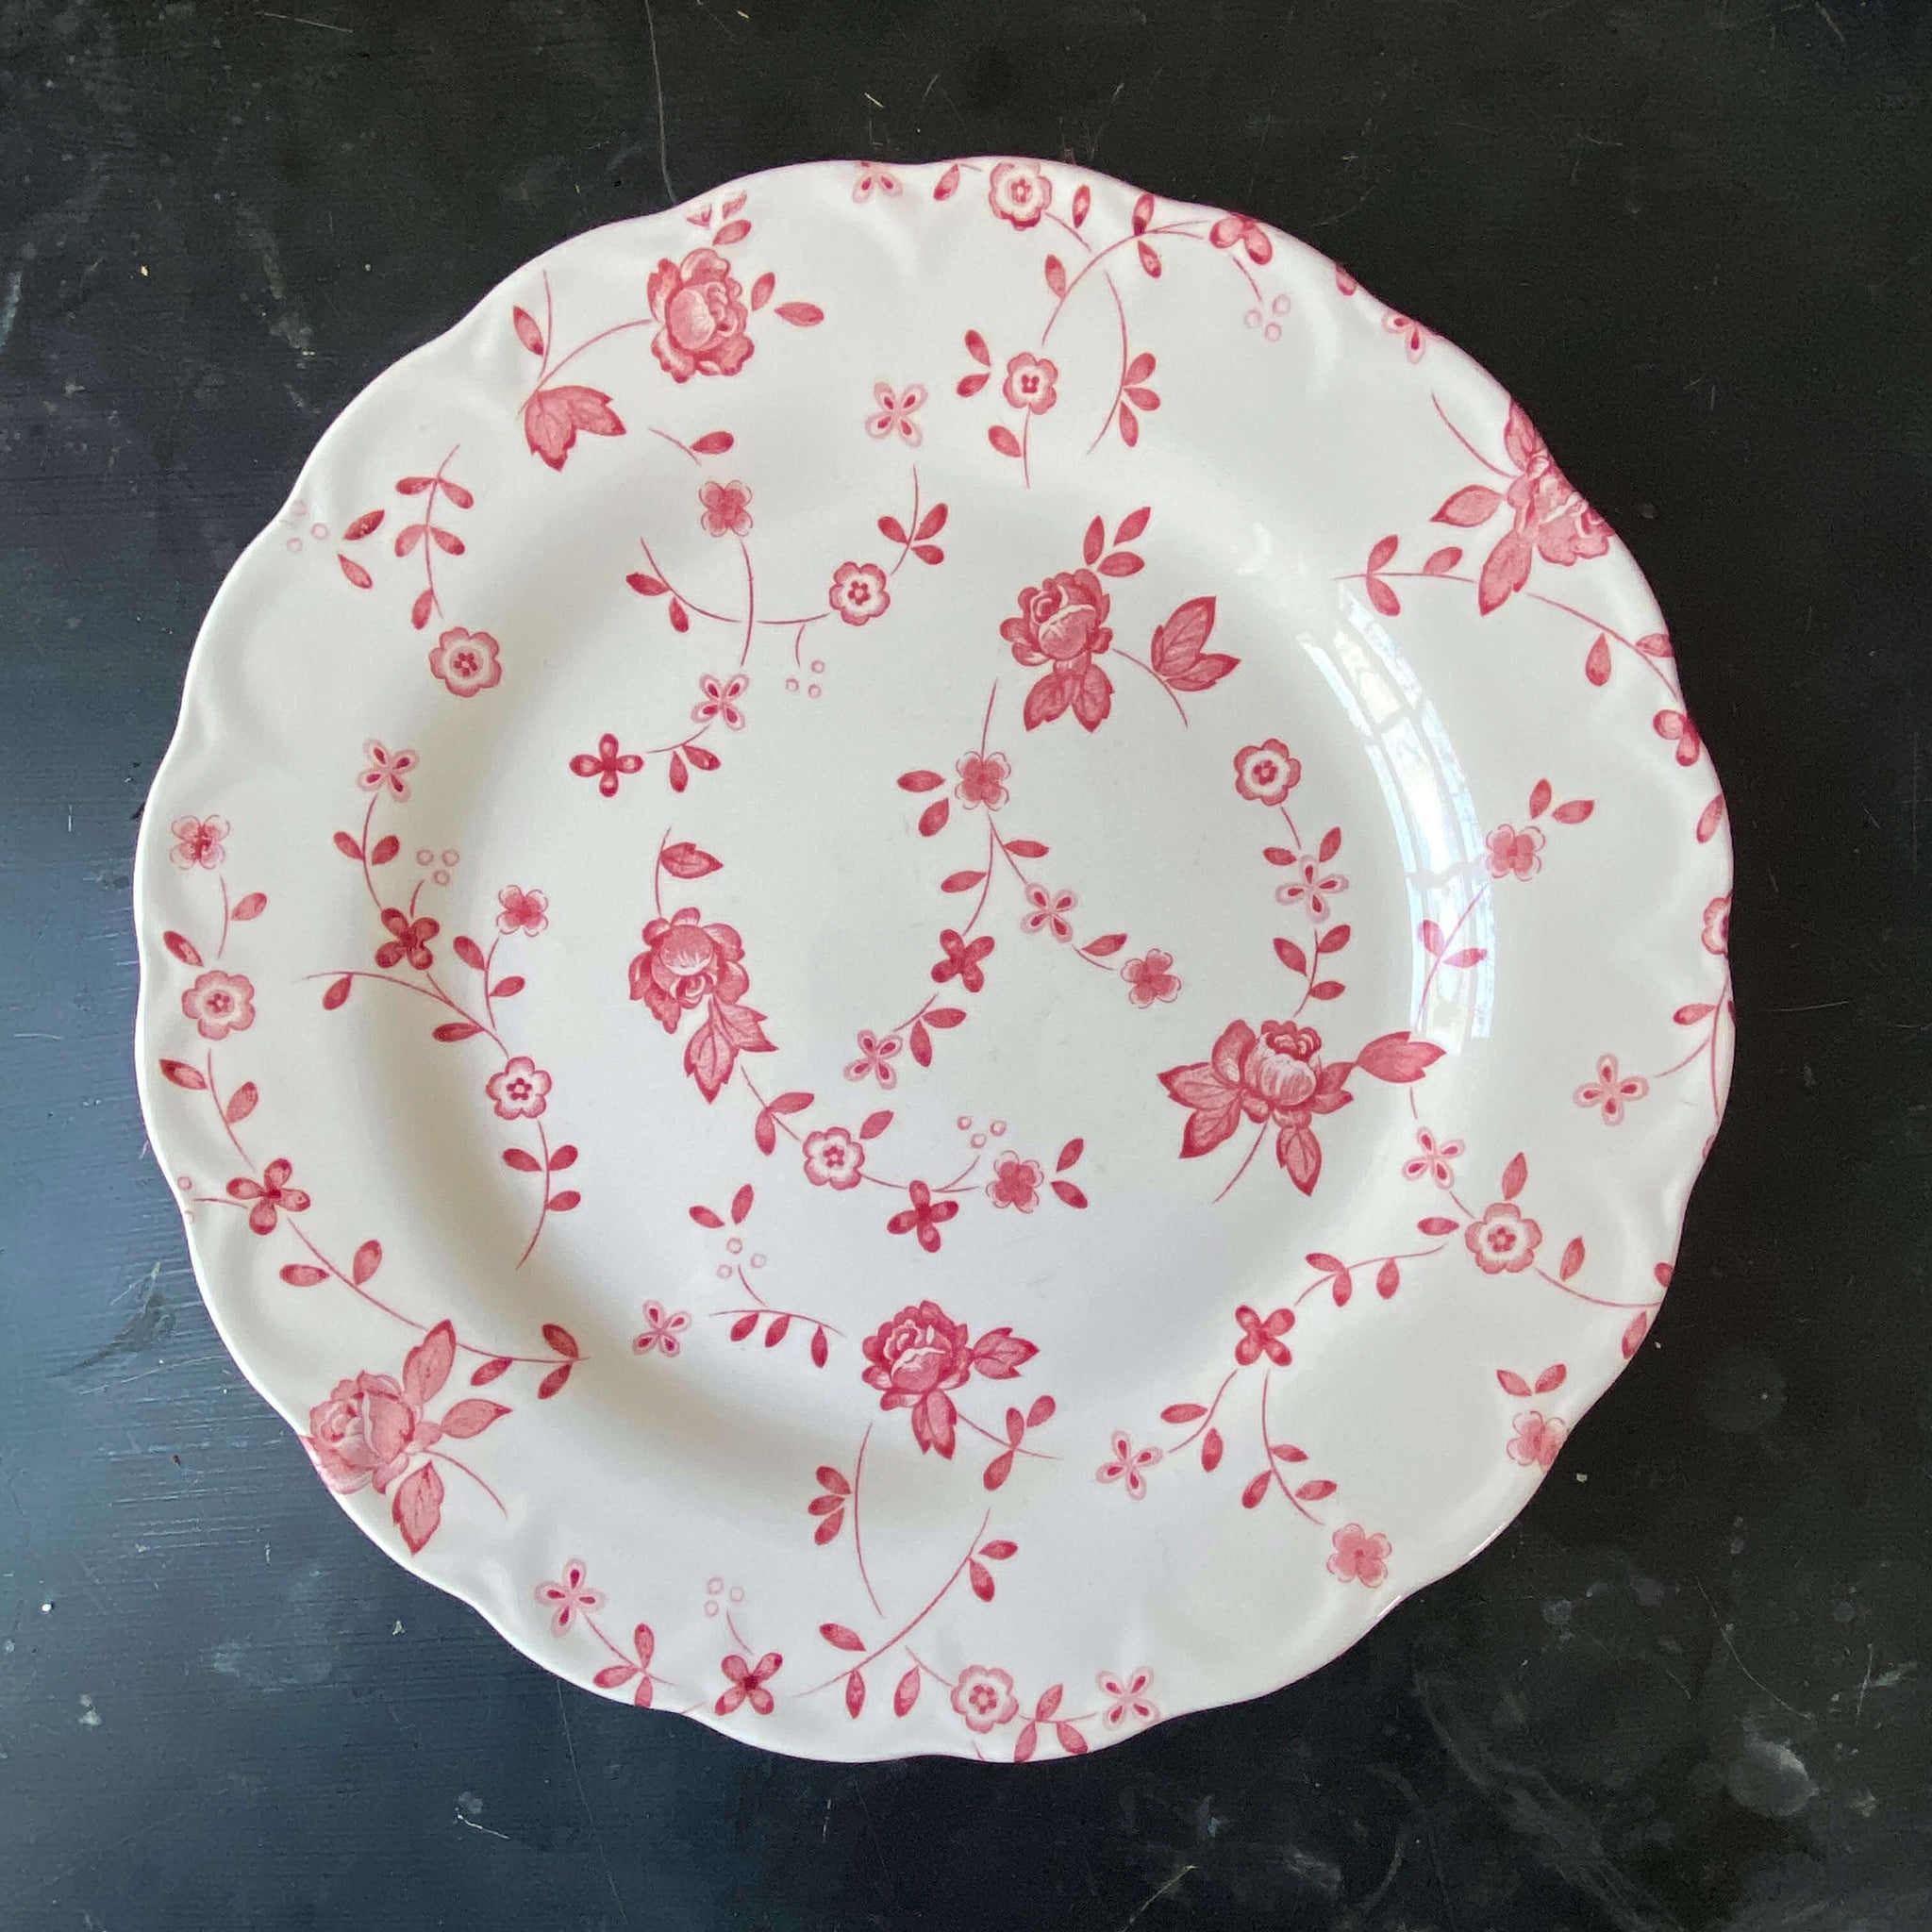 Vintage Nikko Japan Dinner Plate with Red Rose Pattern circa mid-20th Century